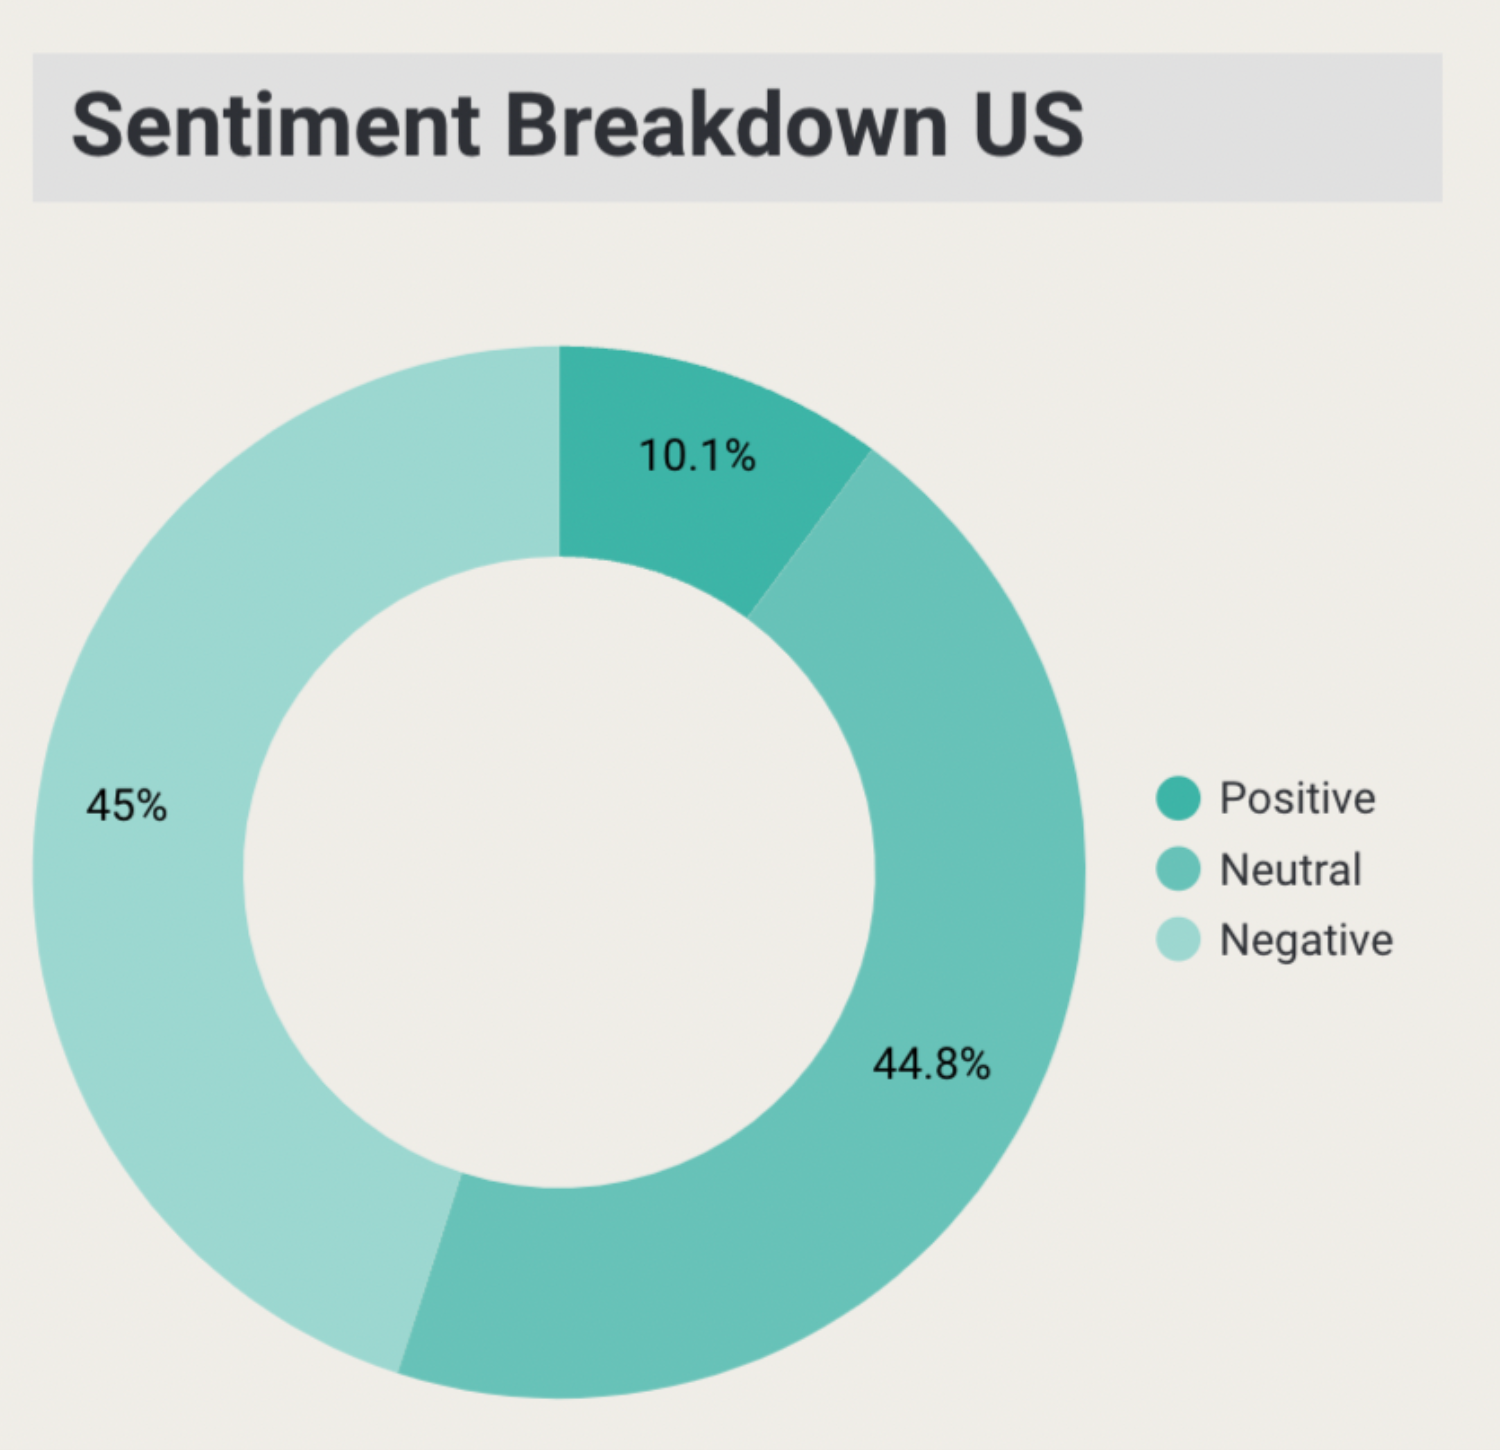 Figure 5: The percentage breakdown of positive, negative and neutral sentiment in the US.